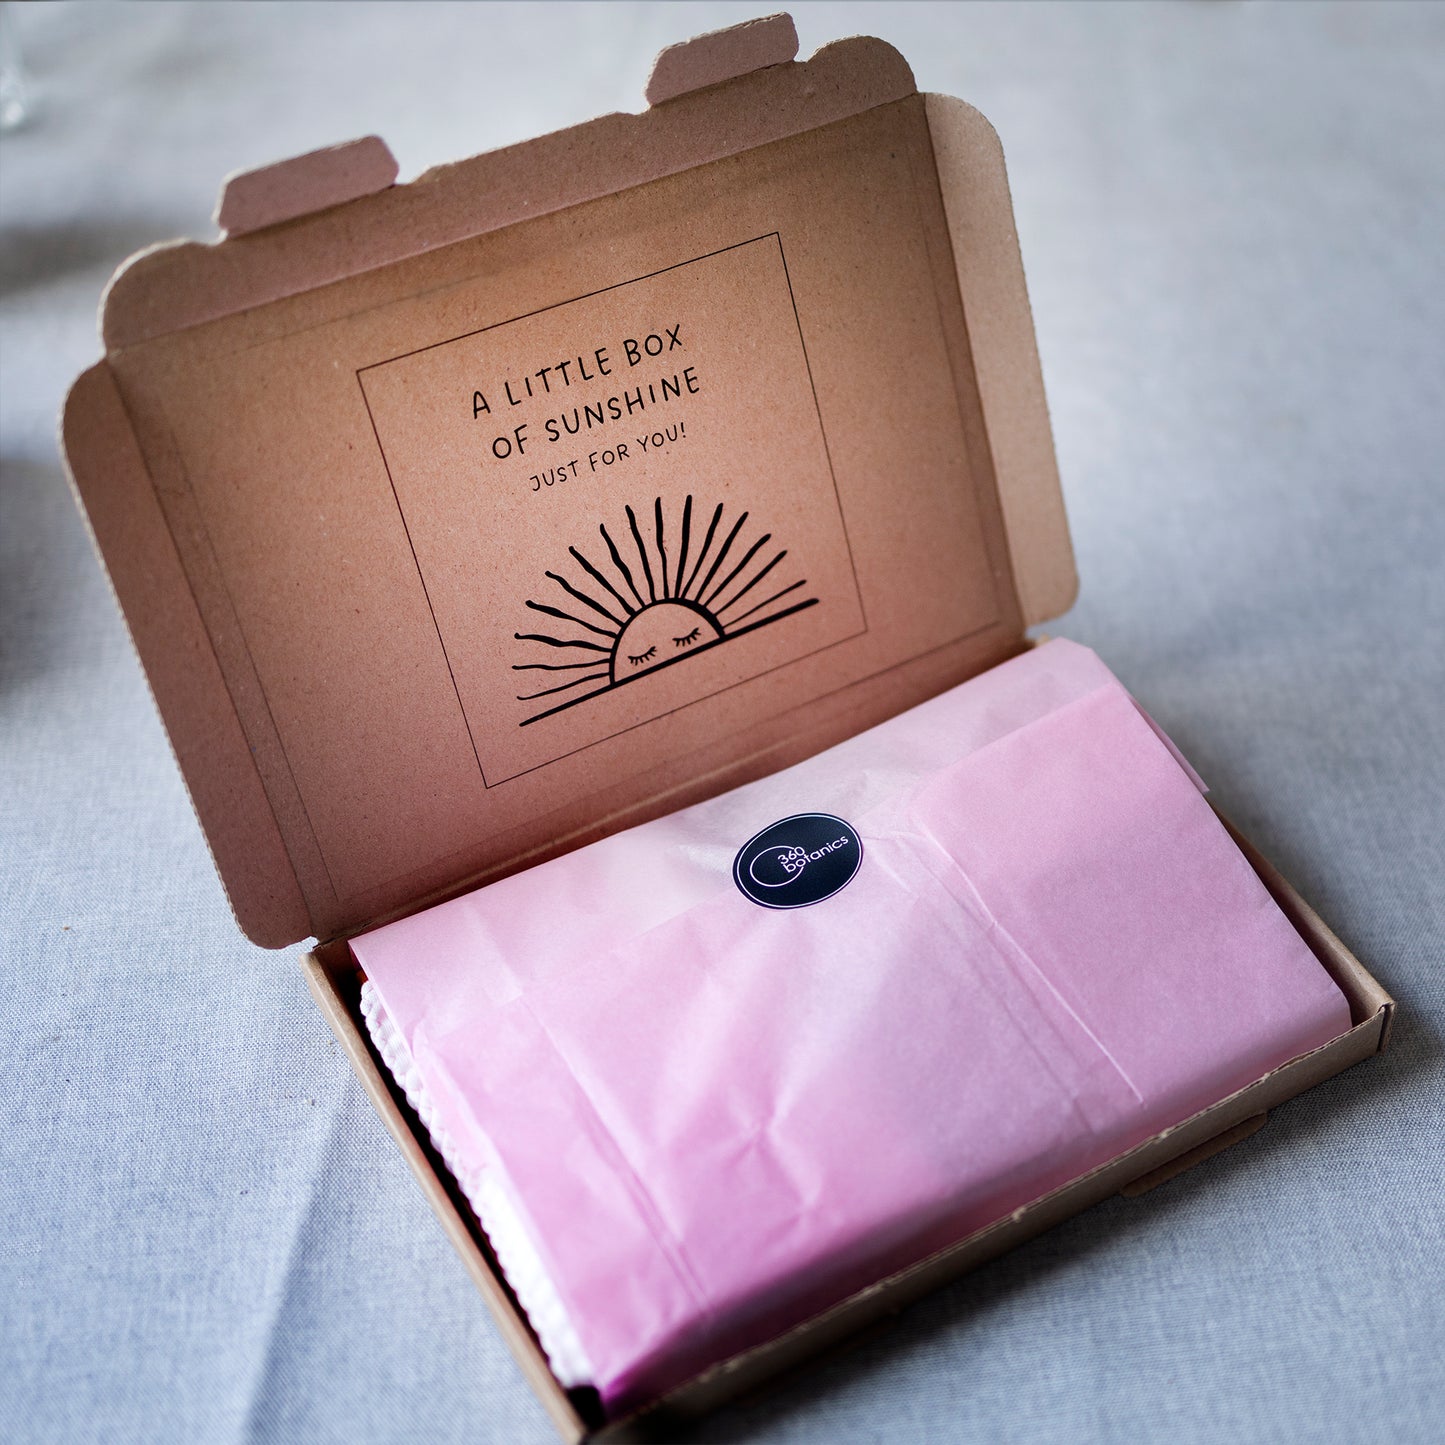 An open cardboard box with "A LITTLE BOX OF SUNSHINE JUST FOR YOU!" printed inside the lid, containing an item wrapped in pink tissue paper sealed with a circular sticker with the text "360 Botanics" on a gray fabric surface.